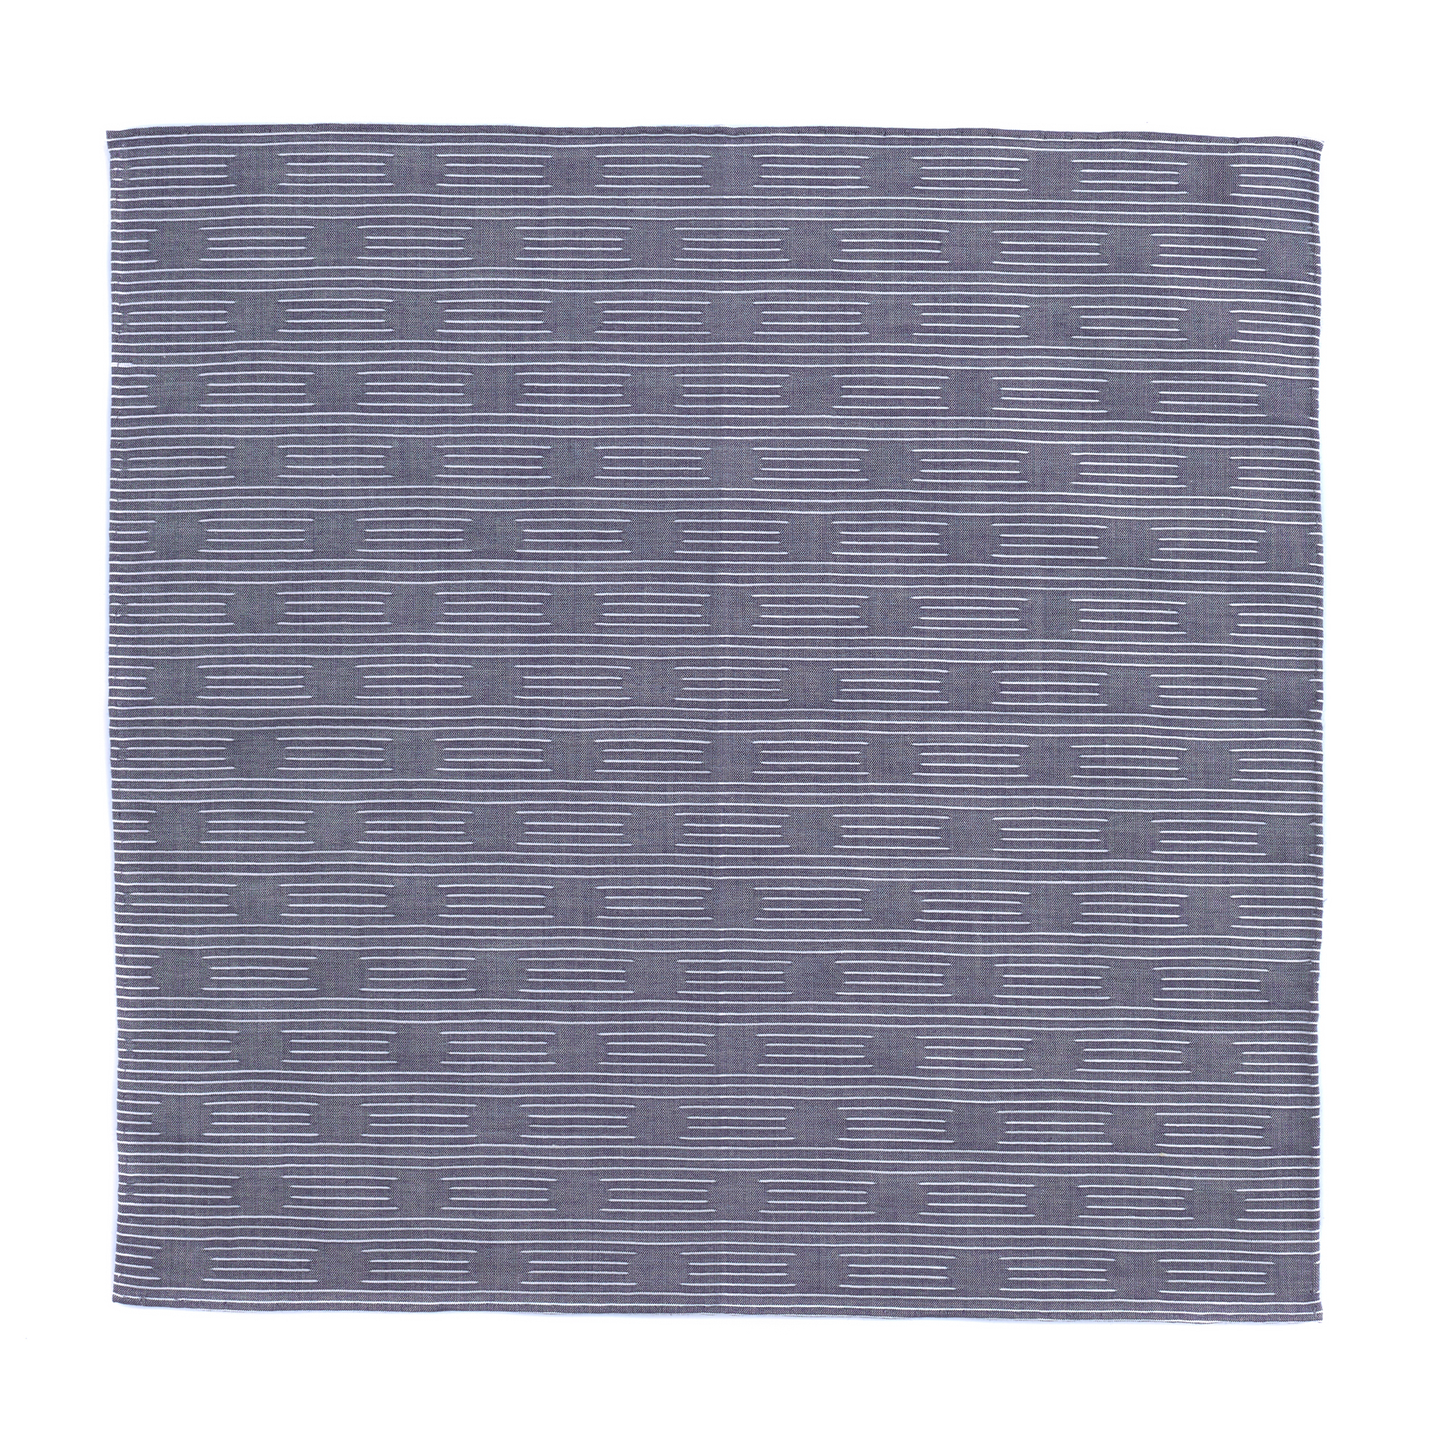 Printed Cotton Pocket Square in Grey